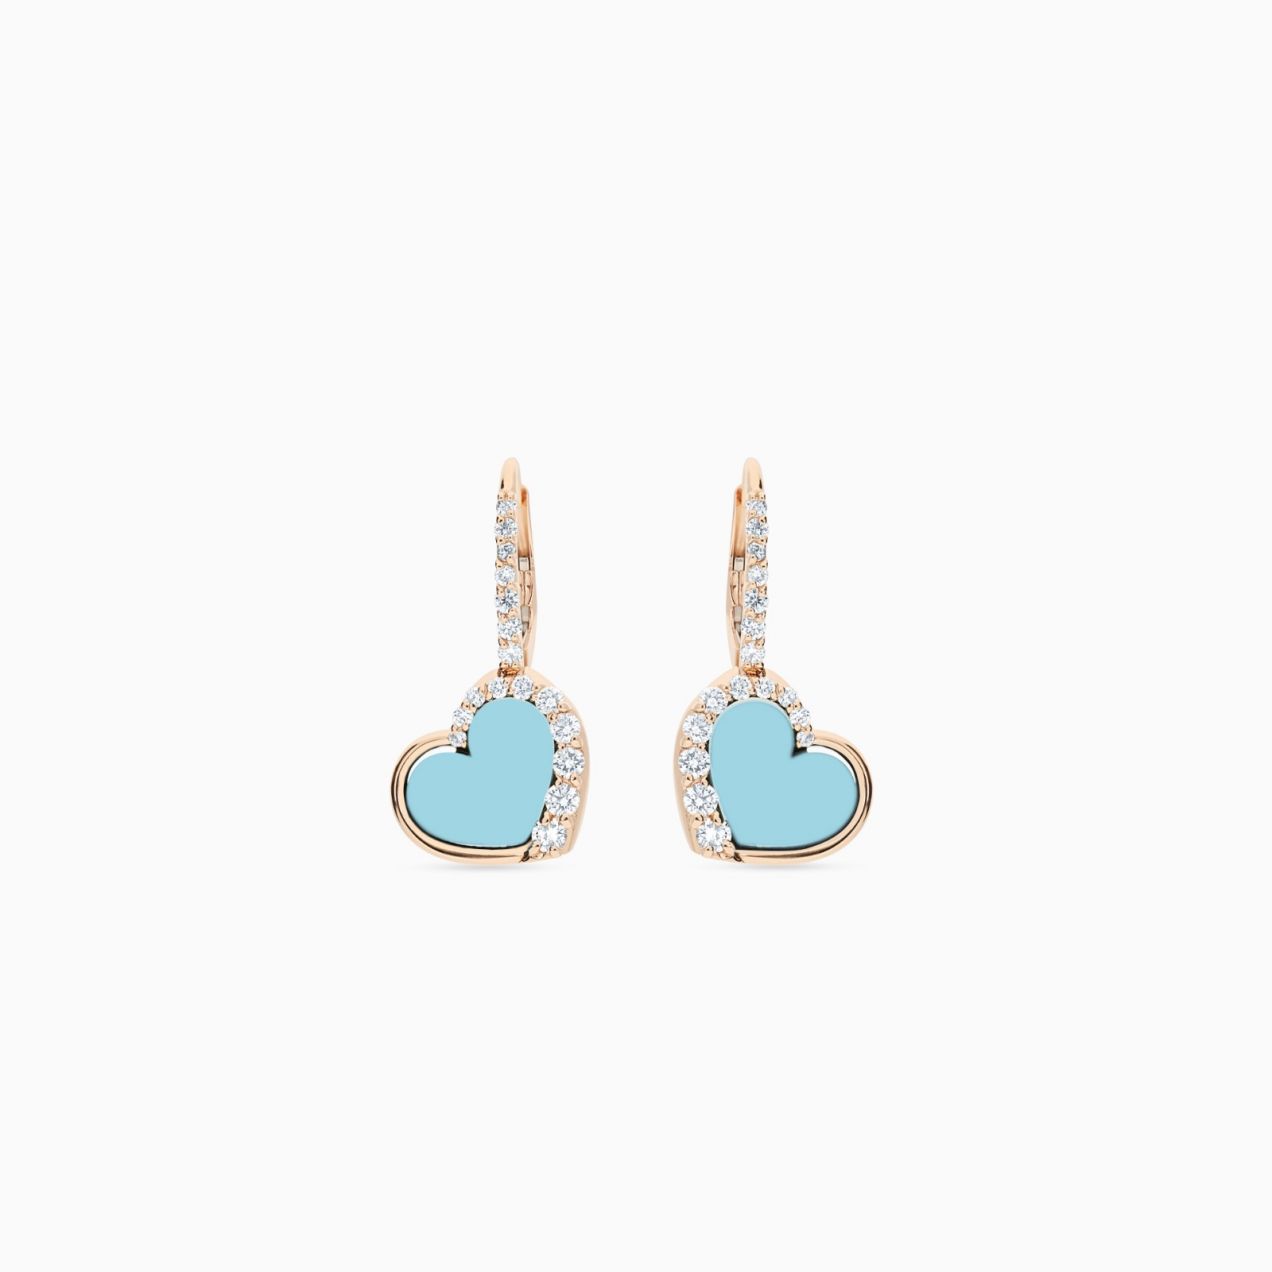 Heart-shaped earrings in rose gold with turquoise and diamonds